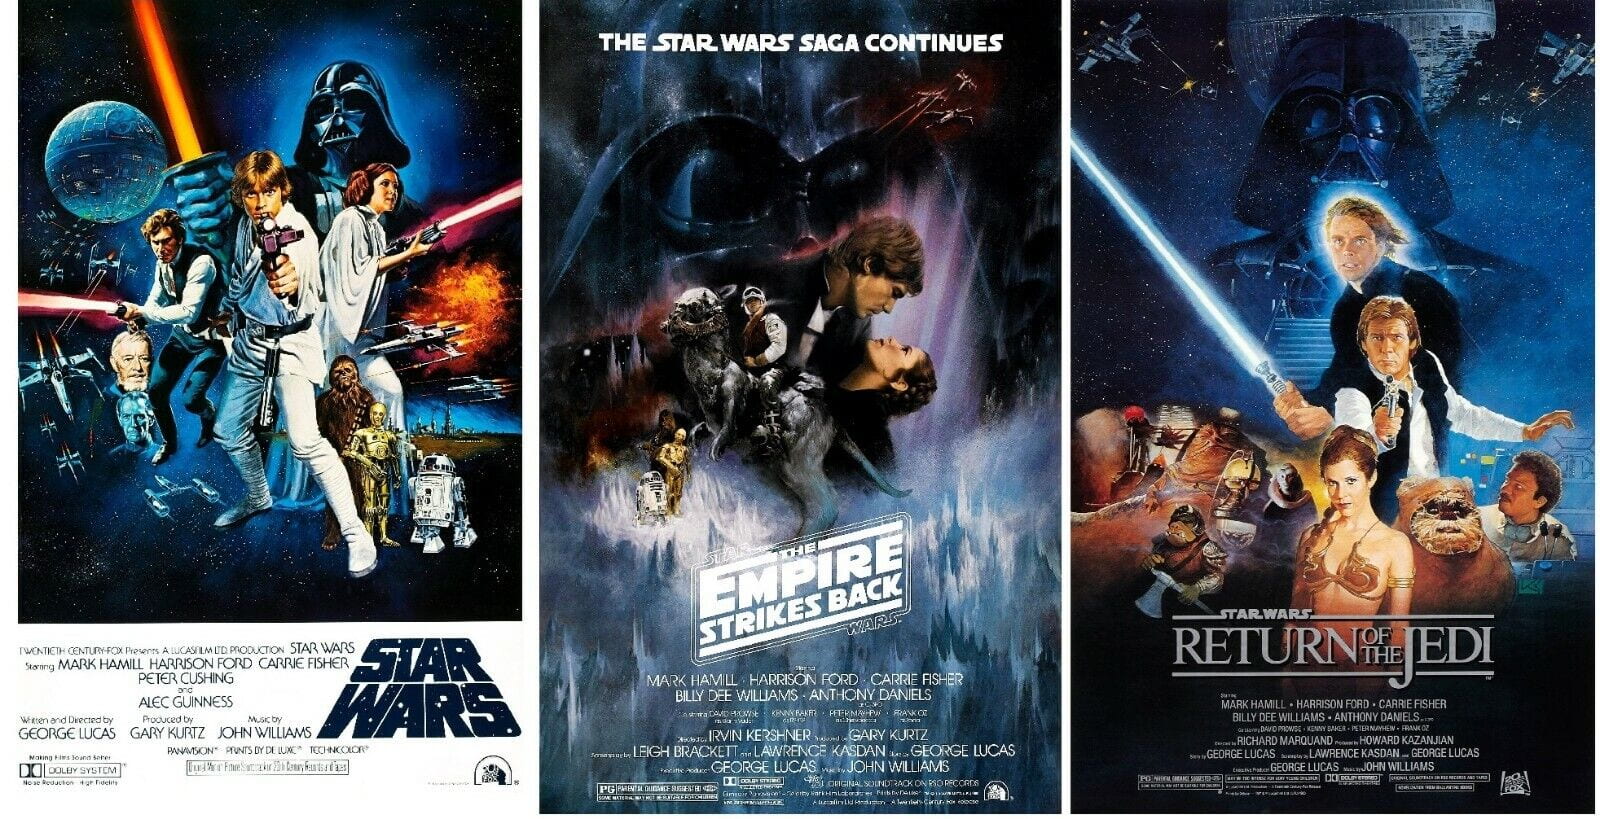 The three posters for the Original Star Wars Trilogy